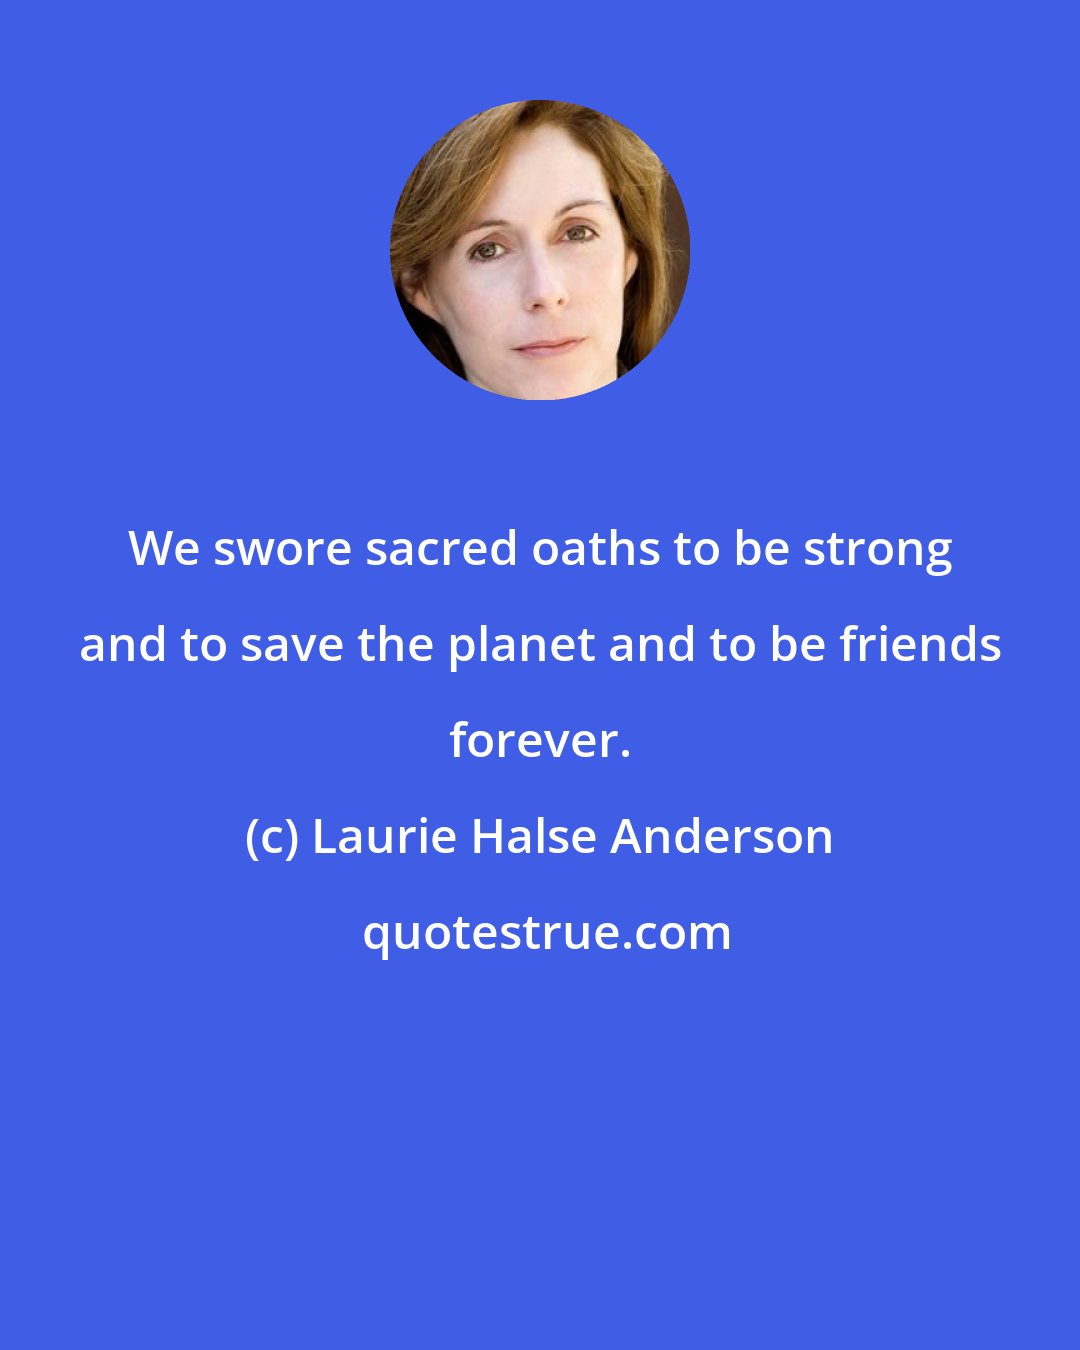 Laurie Halse Anderson: We swore sacred oaths to be strong and to save the planet and to be friends forever.